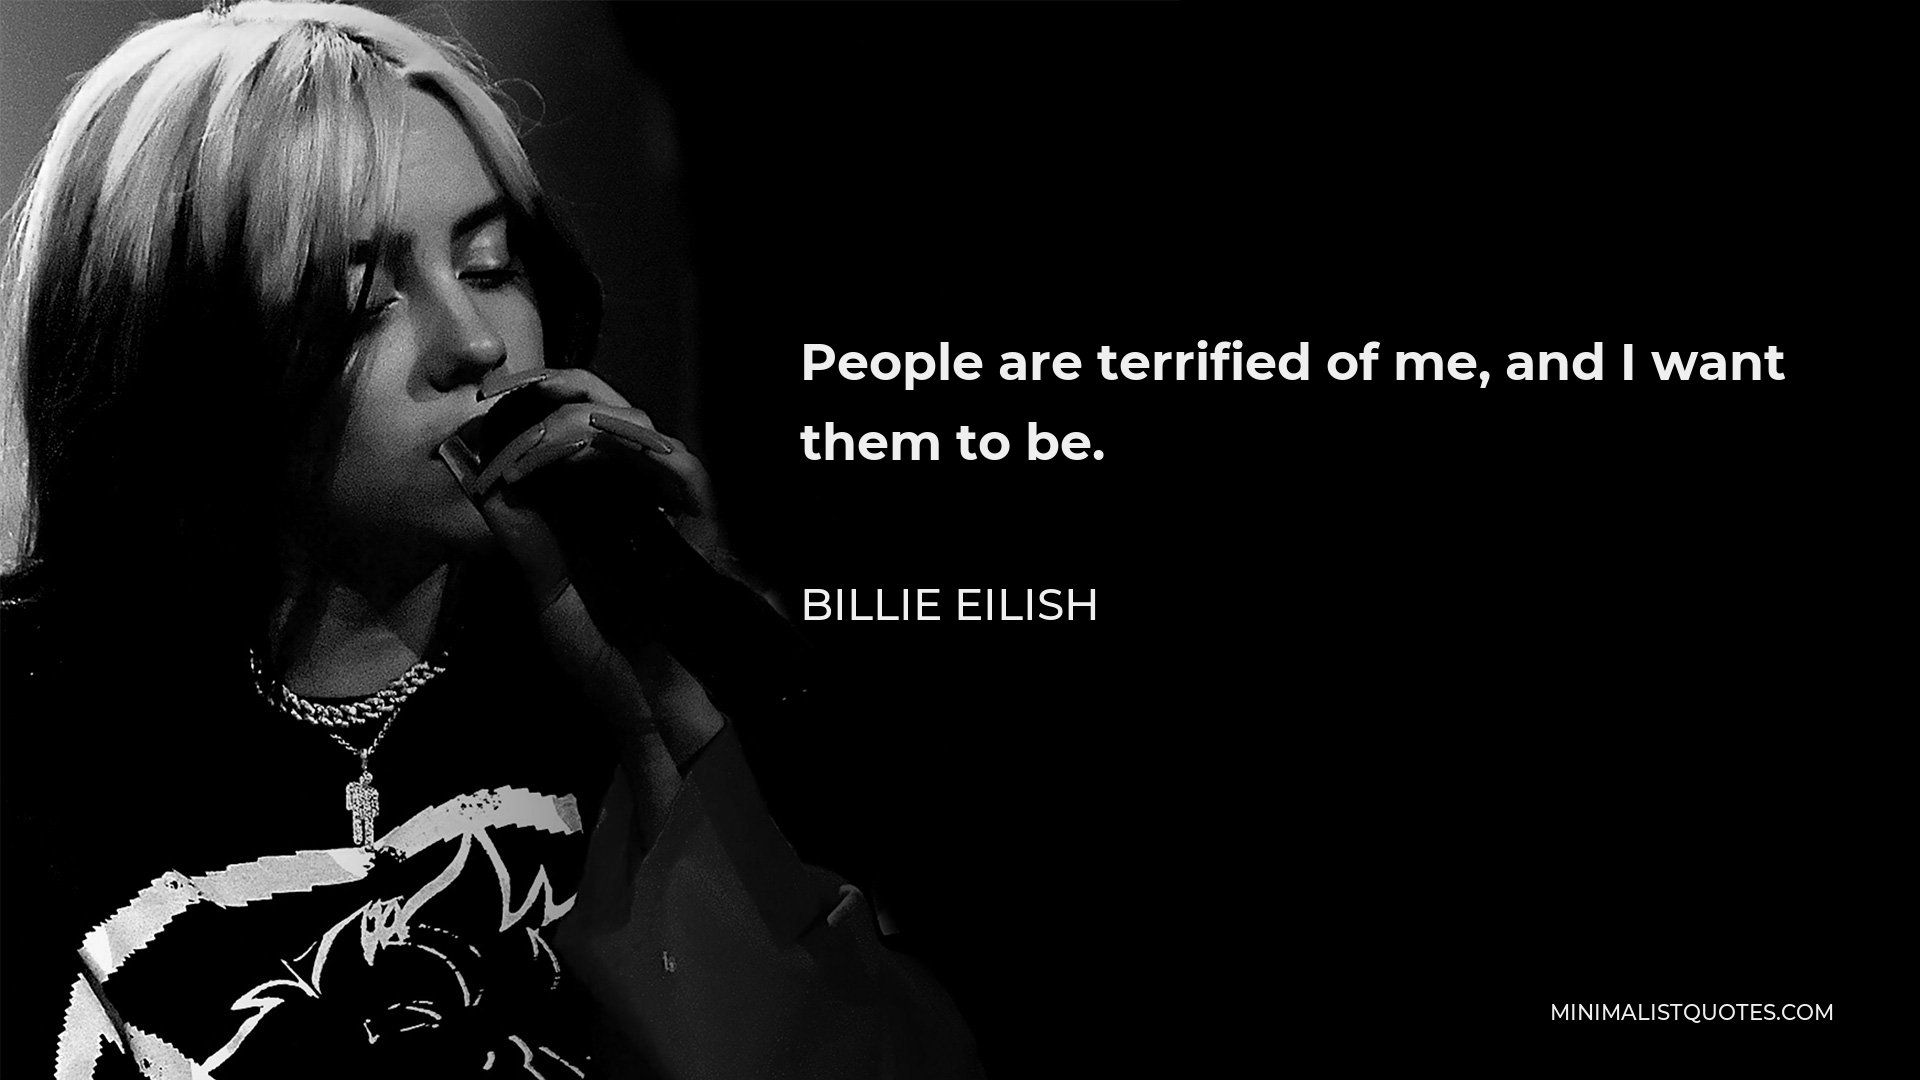 Billie Eilish Quote: People are terrified of me, and I want them to be.